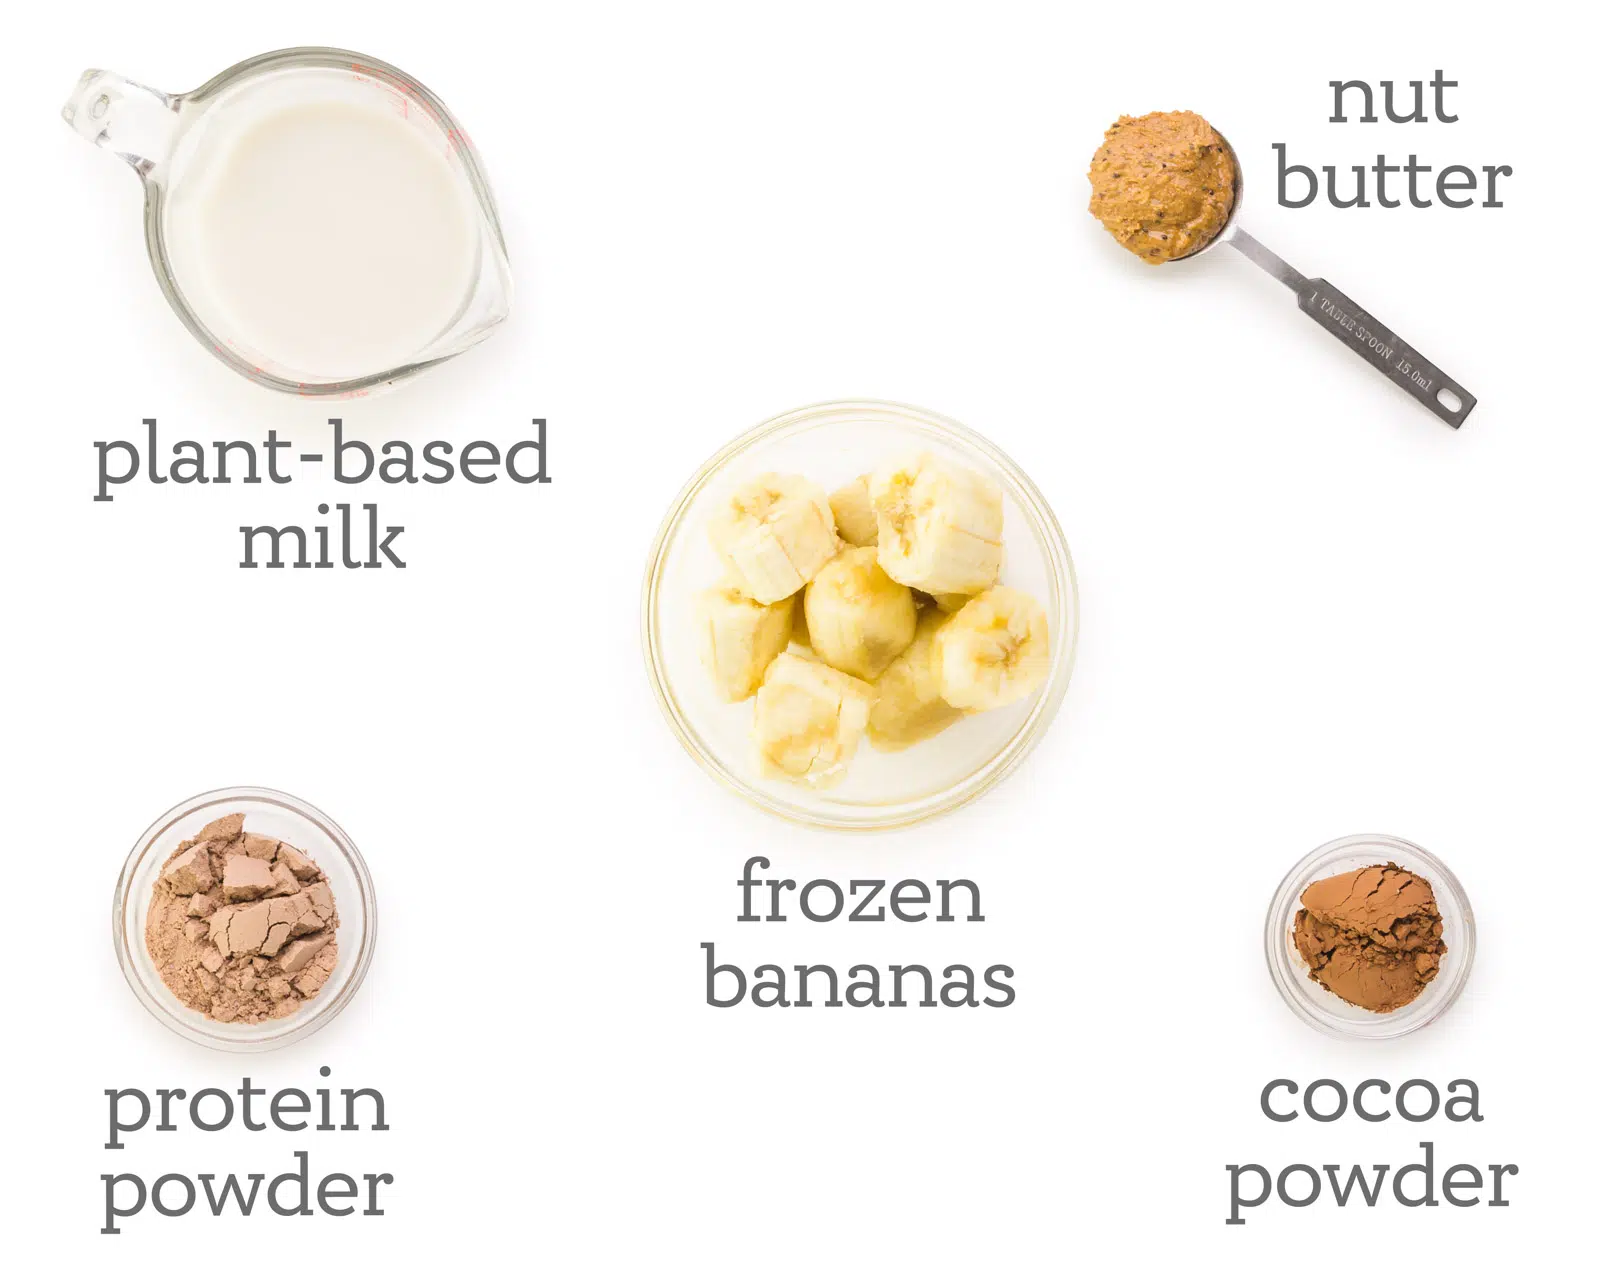 Ingredients are laid out on a table. The labels next to them read, nut butter, cocoa powder, frozen bananas, protein powder, and plant-based milk.